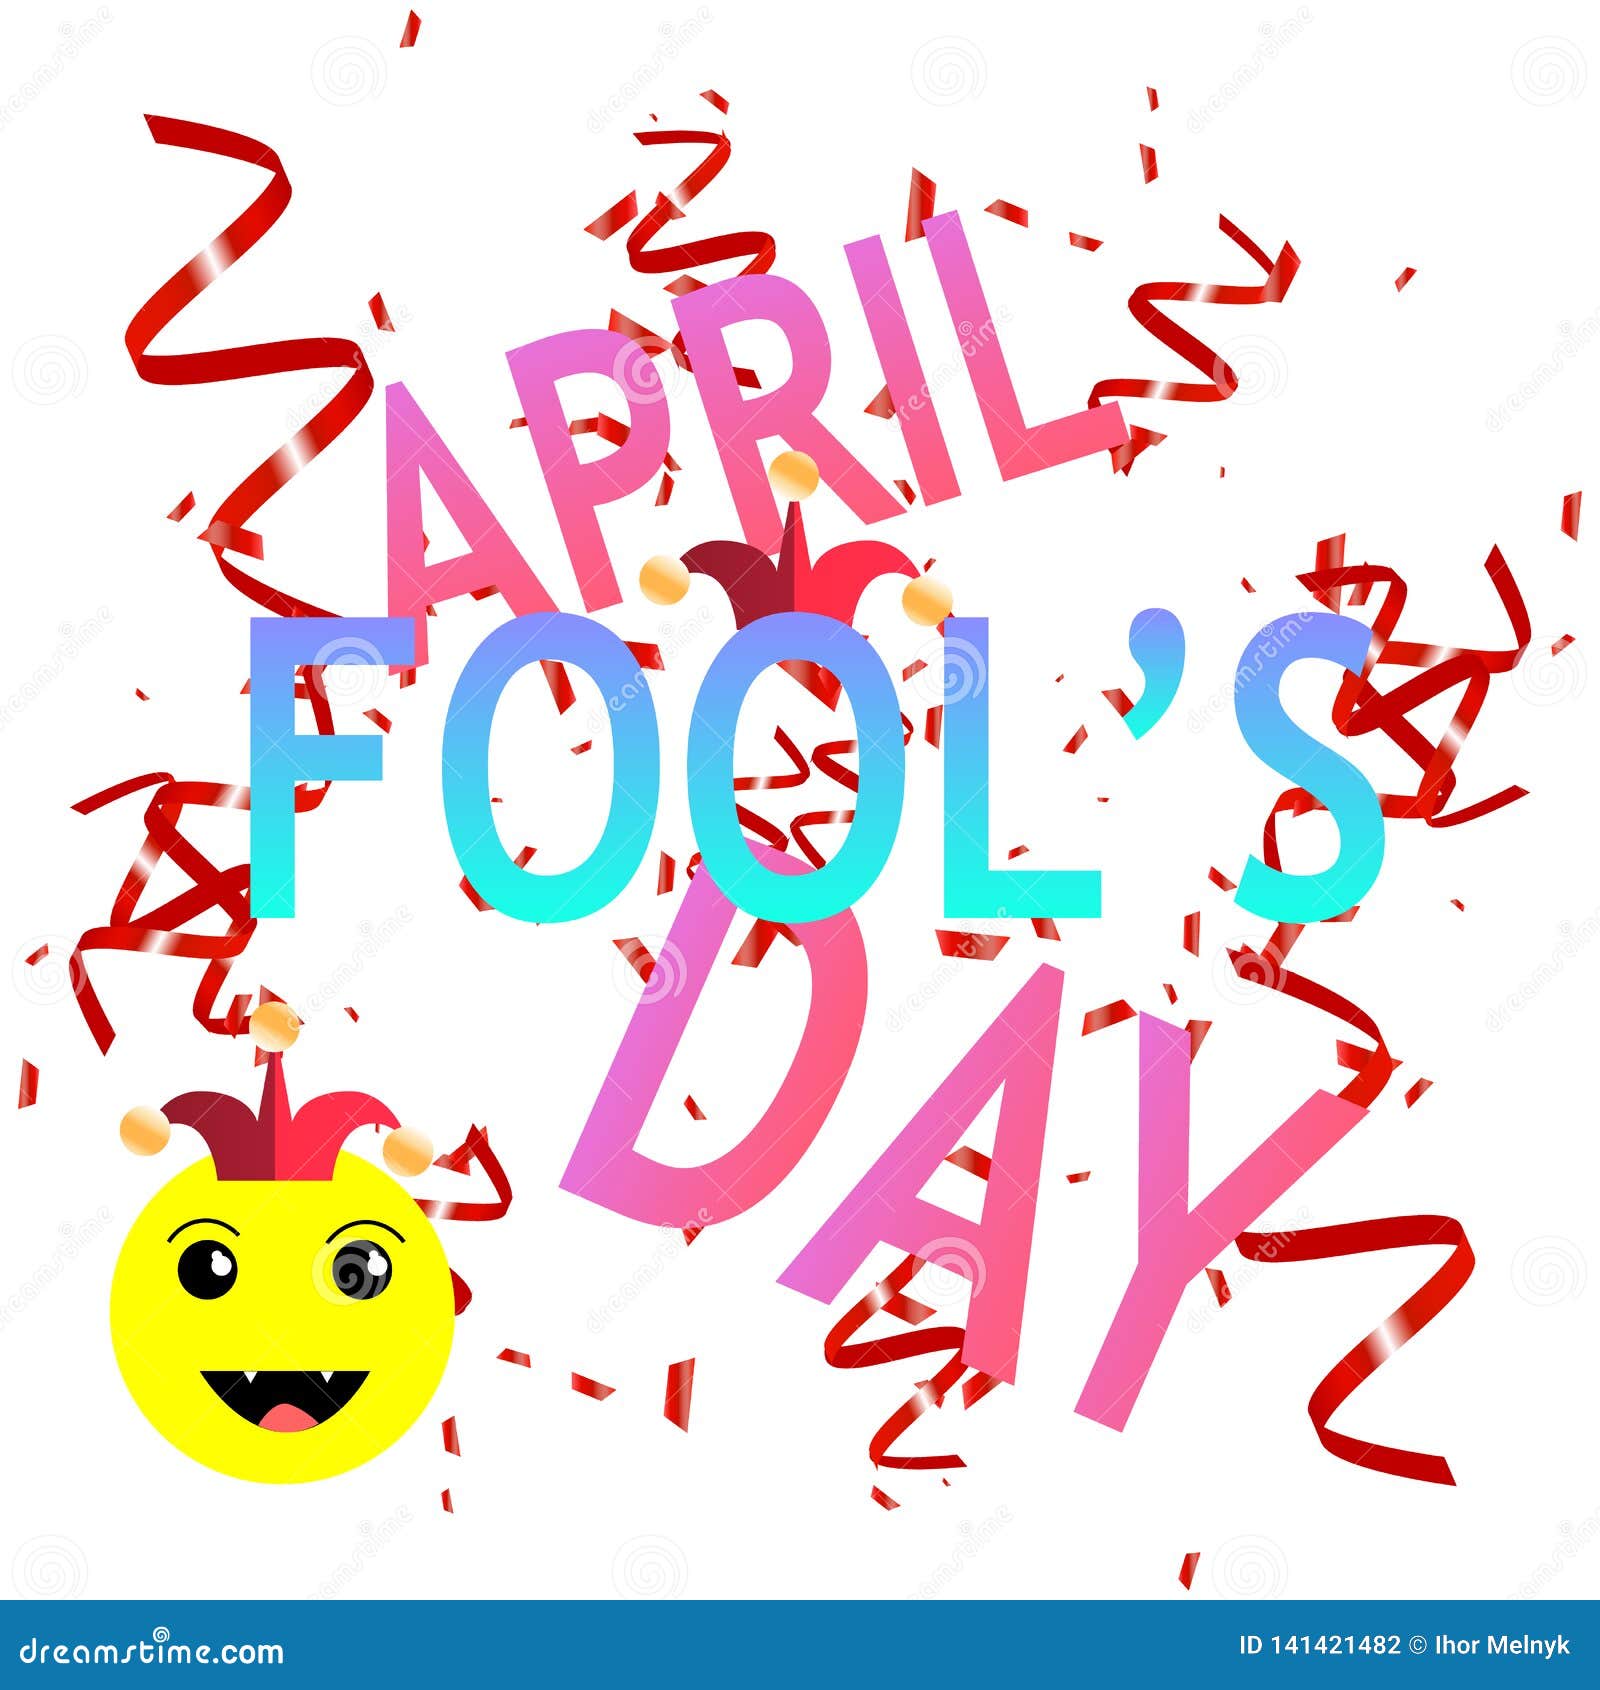 April Fools Day stock vector. Illustration of happiness - 141421482